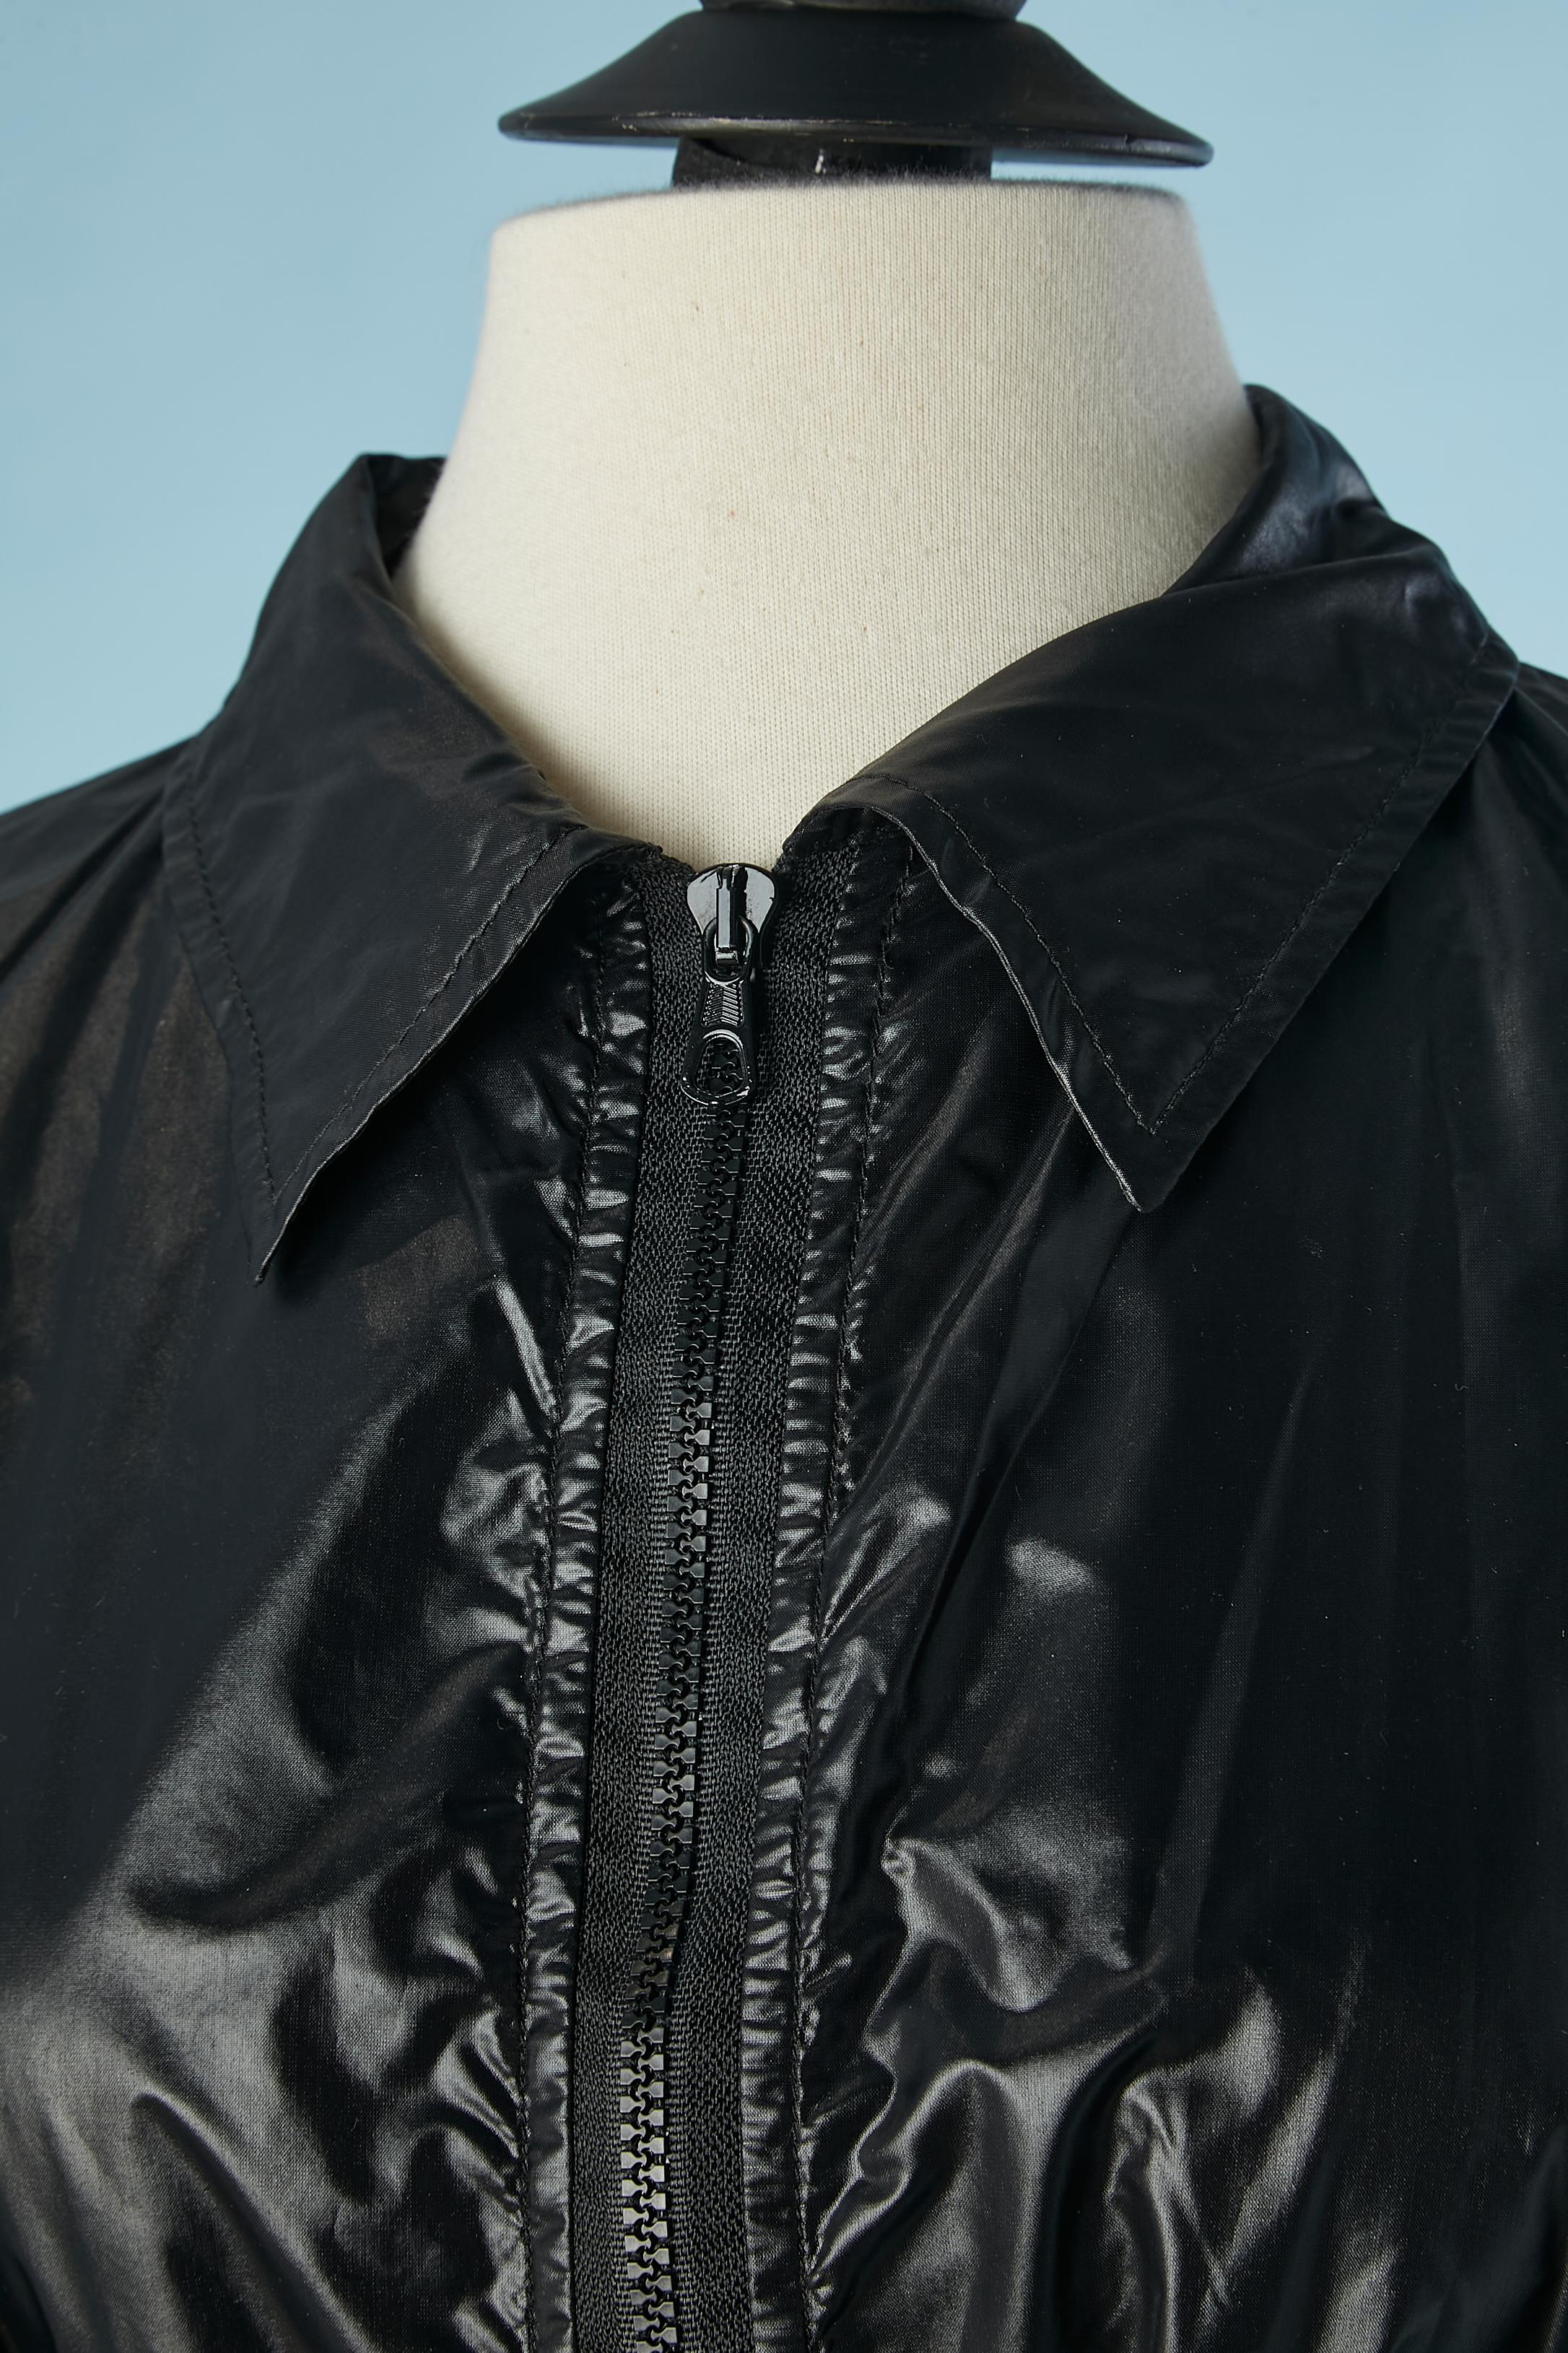 Black nylon raincoat with zip closure . Pockets on both side with zip closure. Belt and belt-loop
SIZE 44 (iT) 40 (Fr) L 